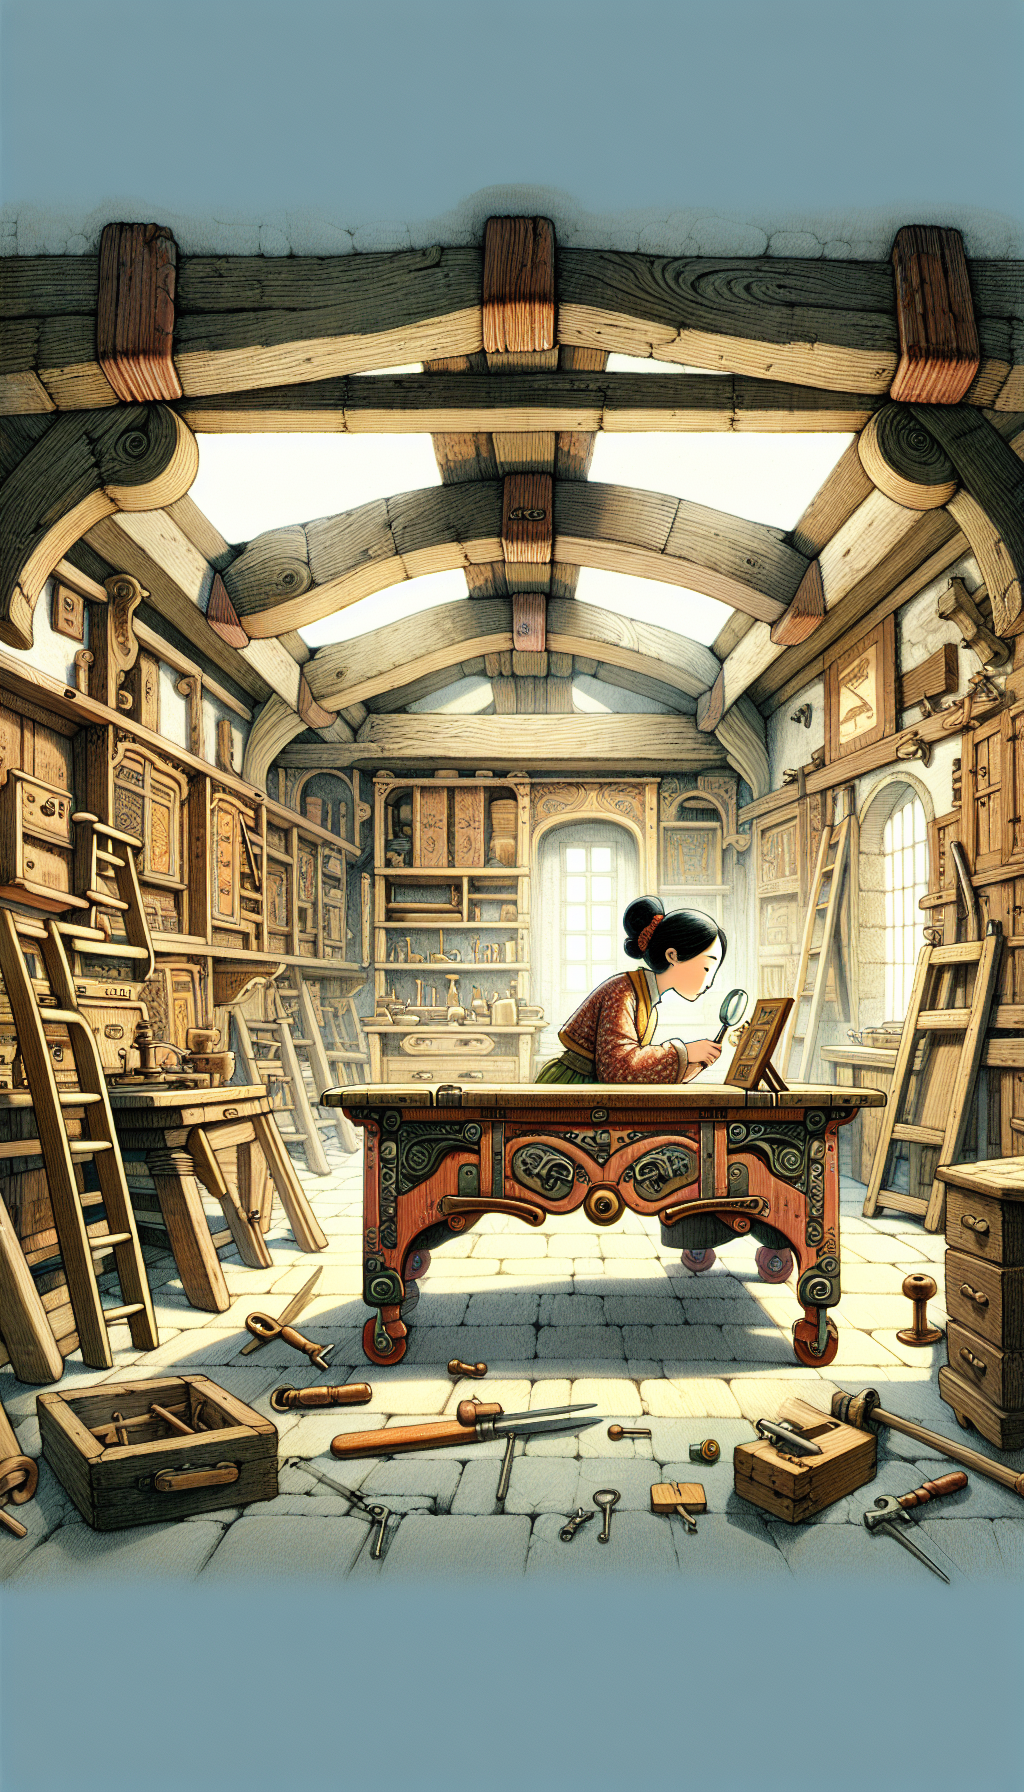 An illustration depicts a whimsical cross-section of a quaint artisan's workshop, where joints and fixtures from various eras form the walls and ceiling. In the center, a character, both detective and builder, examines an antique drop leaf table with a magnifying glass, revealing the unique hinges and woodwork signatures, contrasting modern techniques around it in a playful mix of styles.